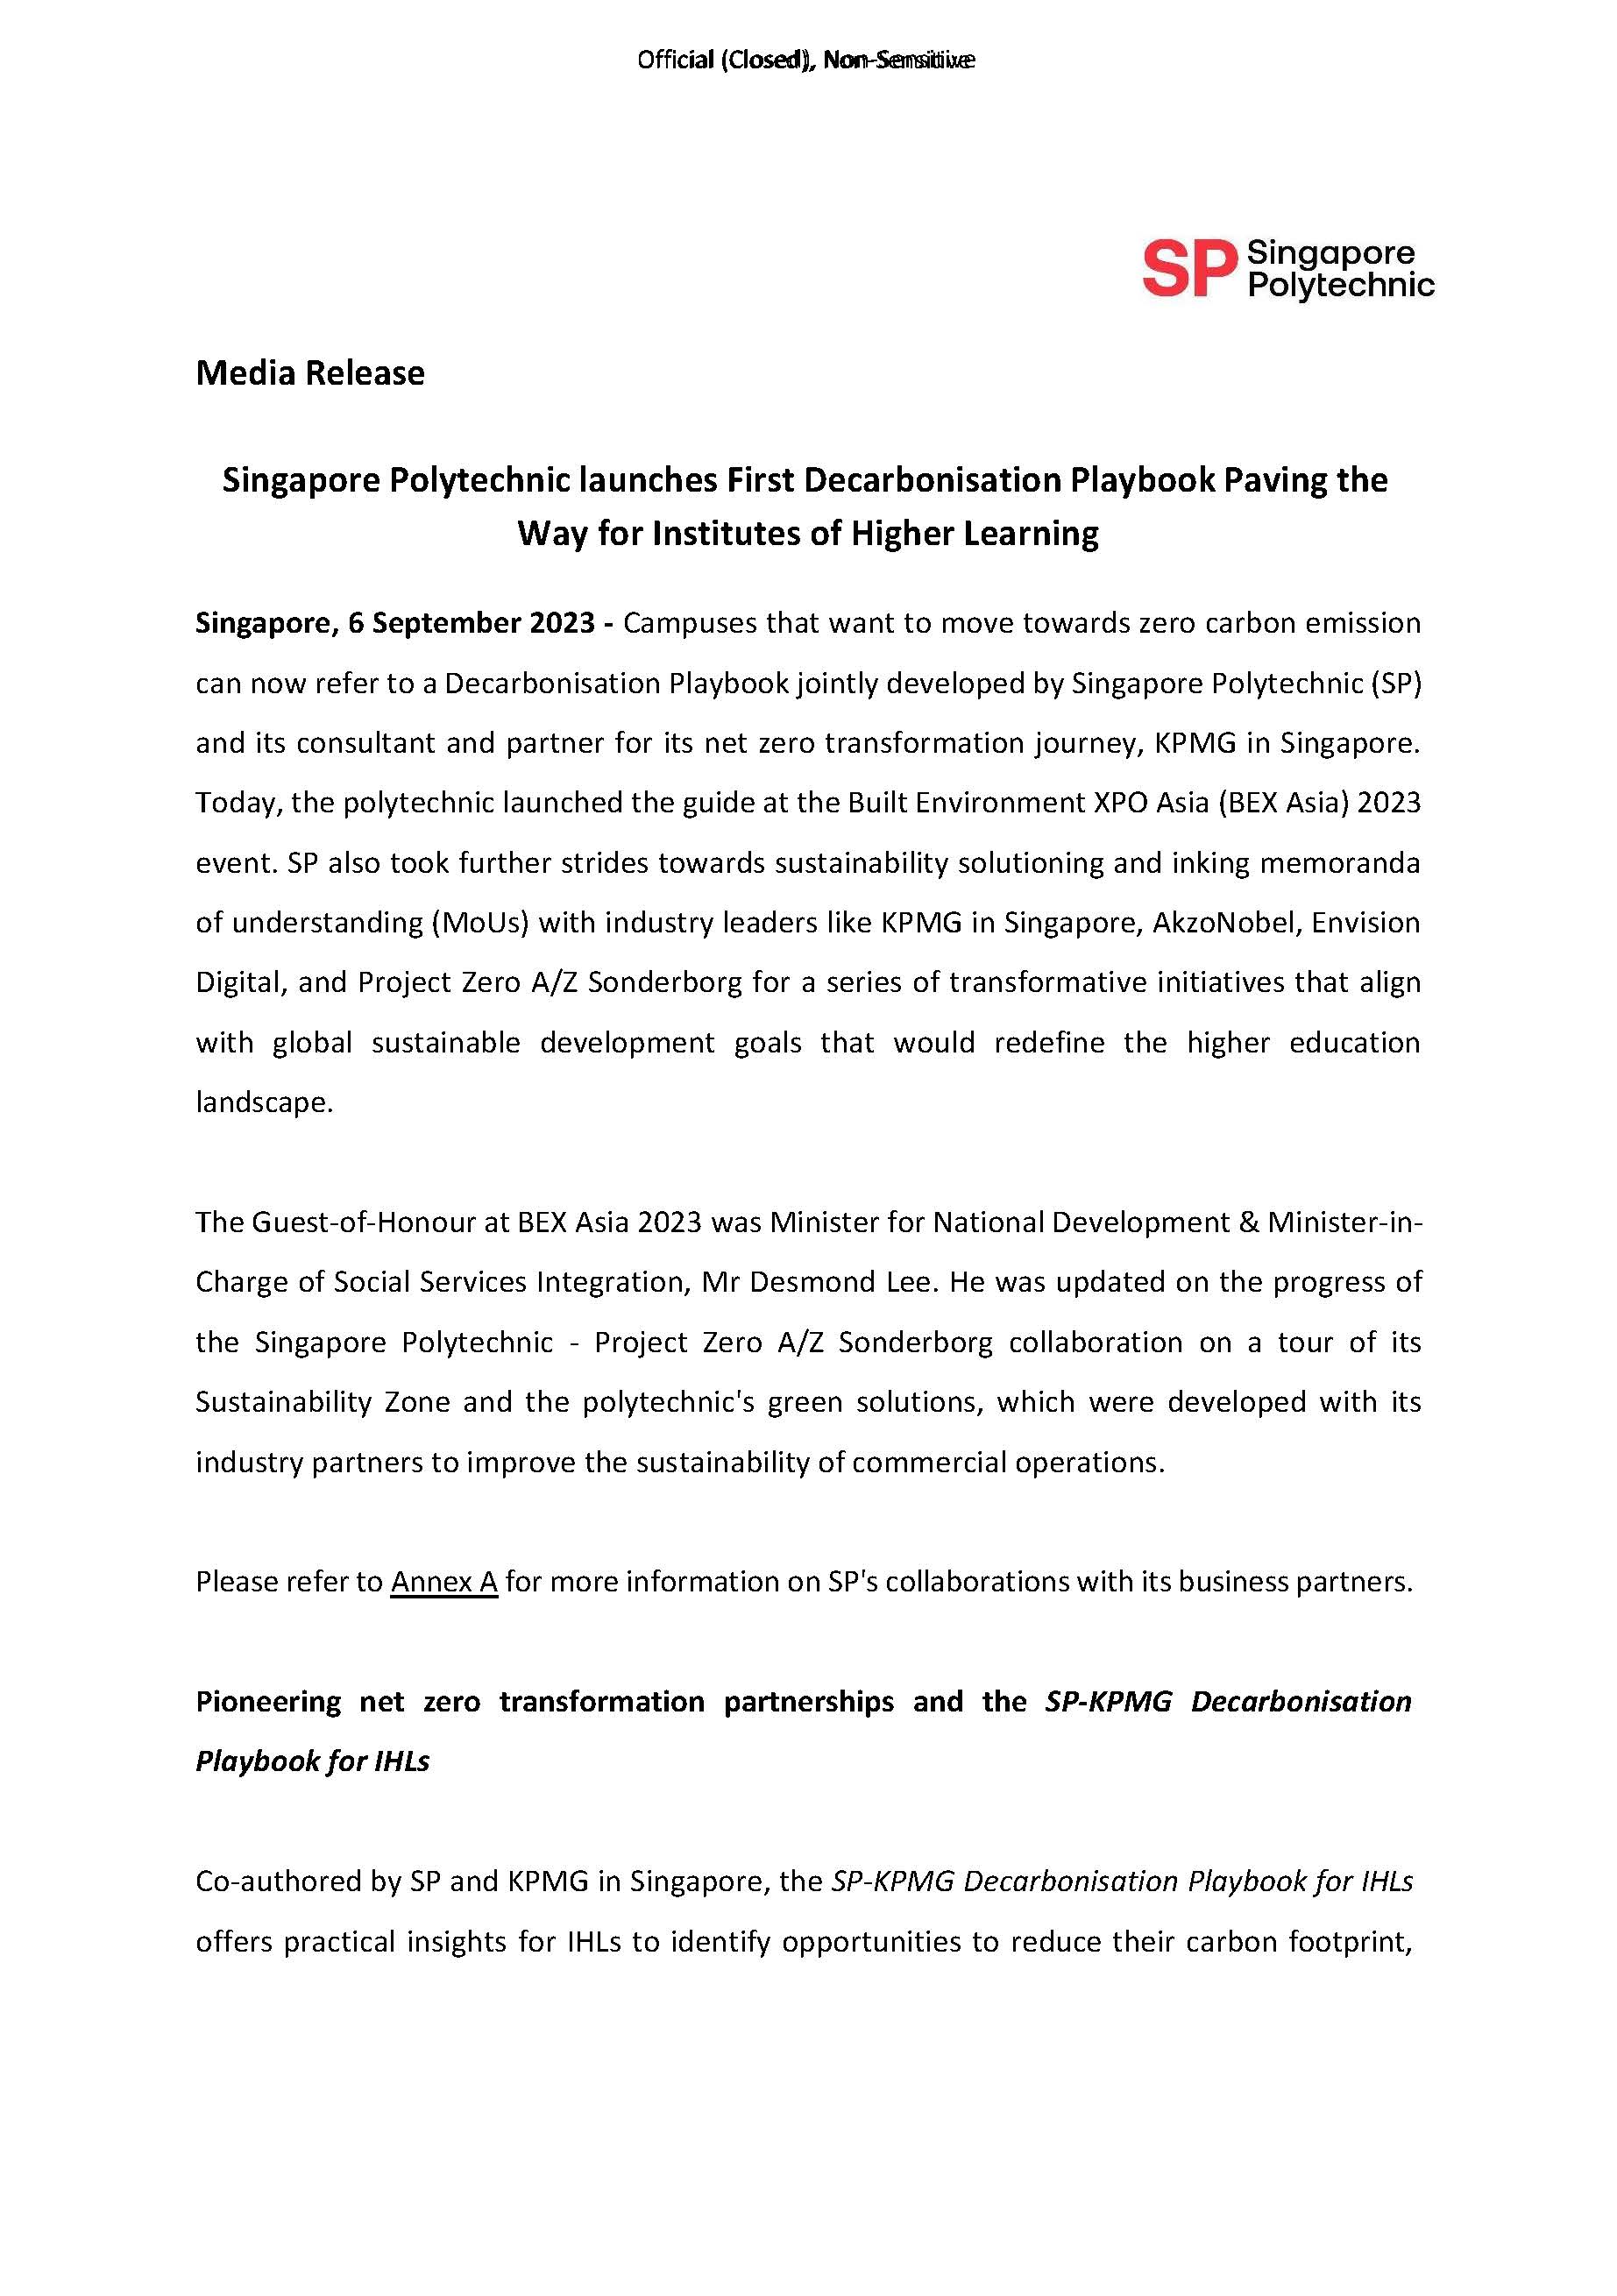 MEDIA RELEASE-Singapore Polytechnic launches First Decarbonisation Playbook here for education institutions_060923_Page_1